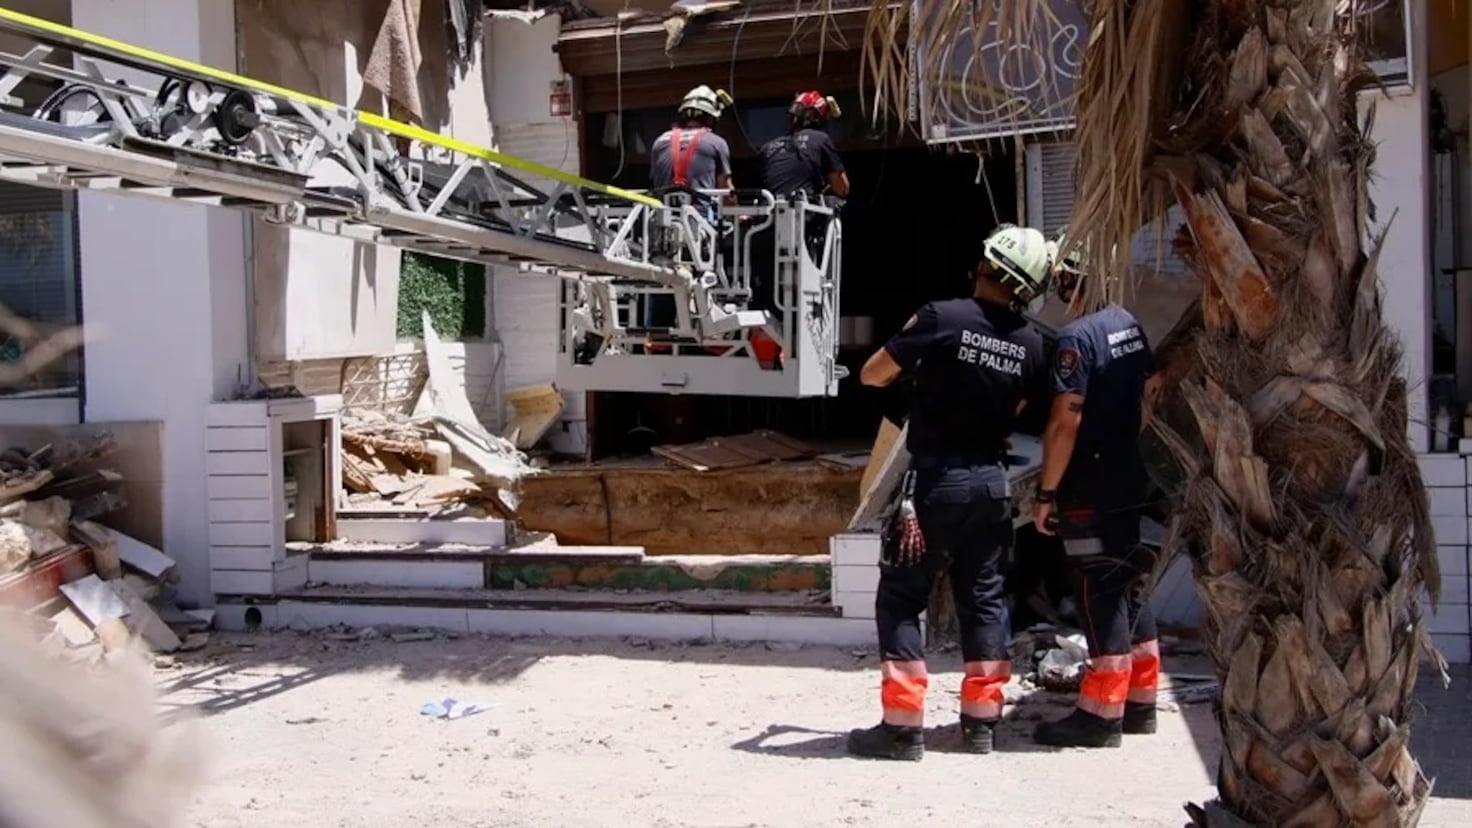 The collapsed premises in Palma did not have a terrace license: its use was illegal
